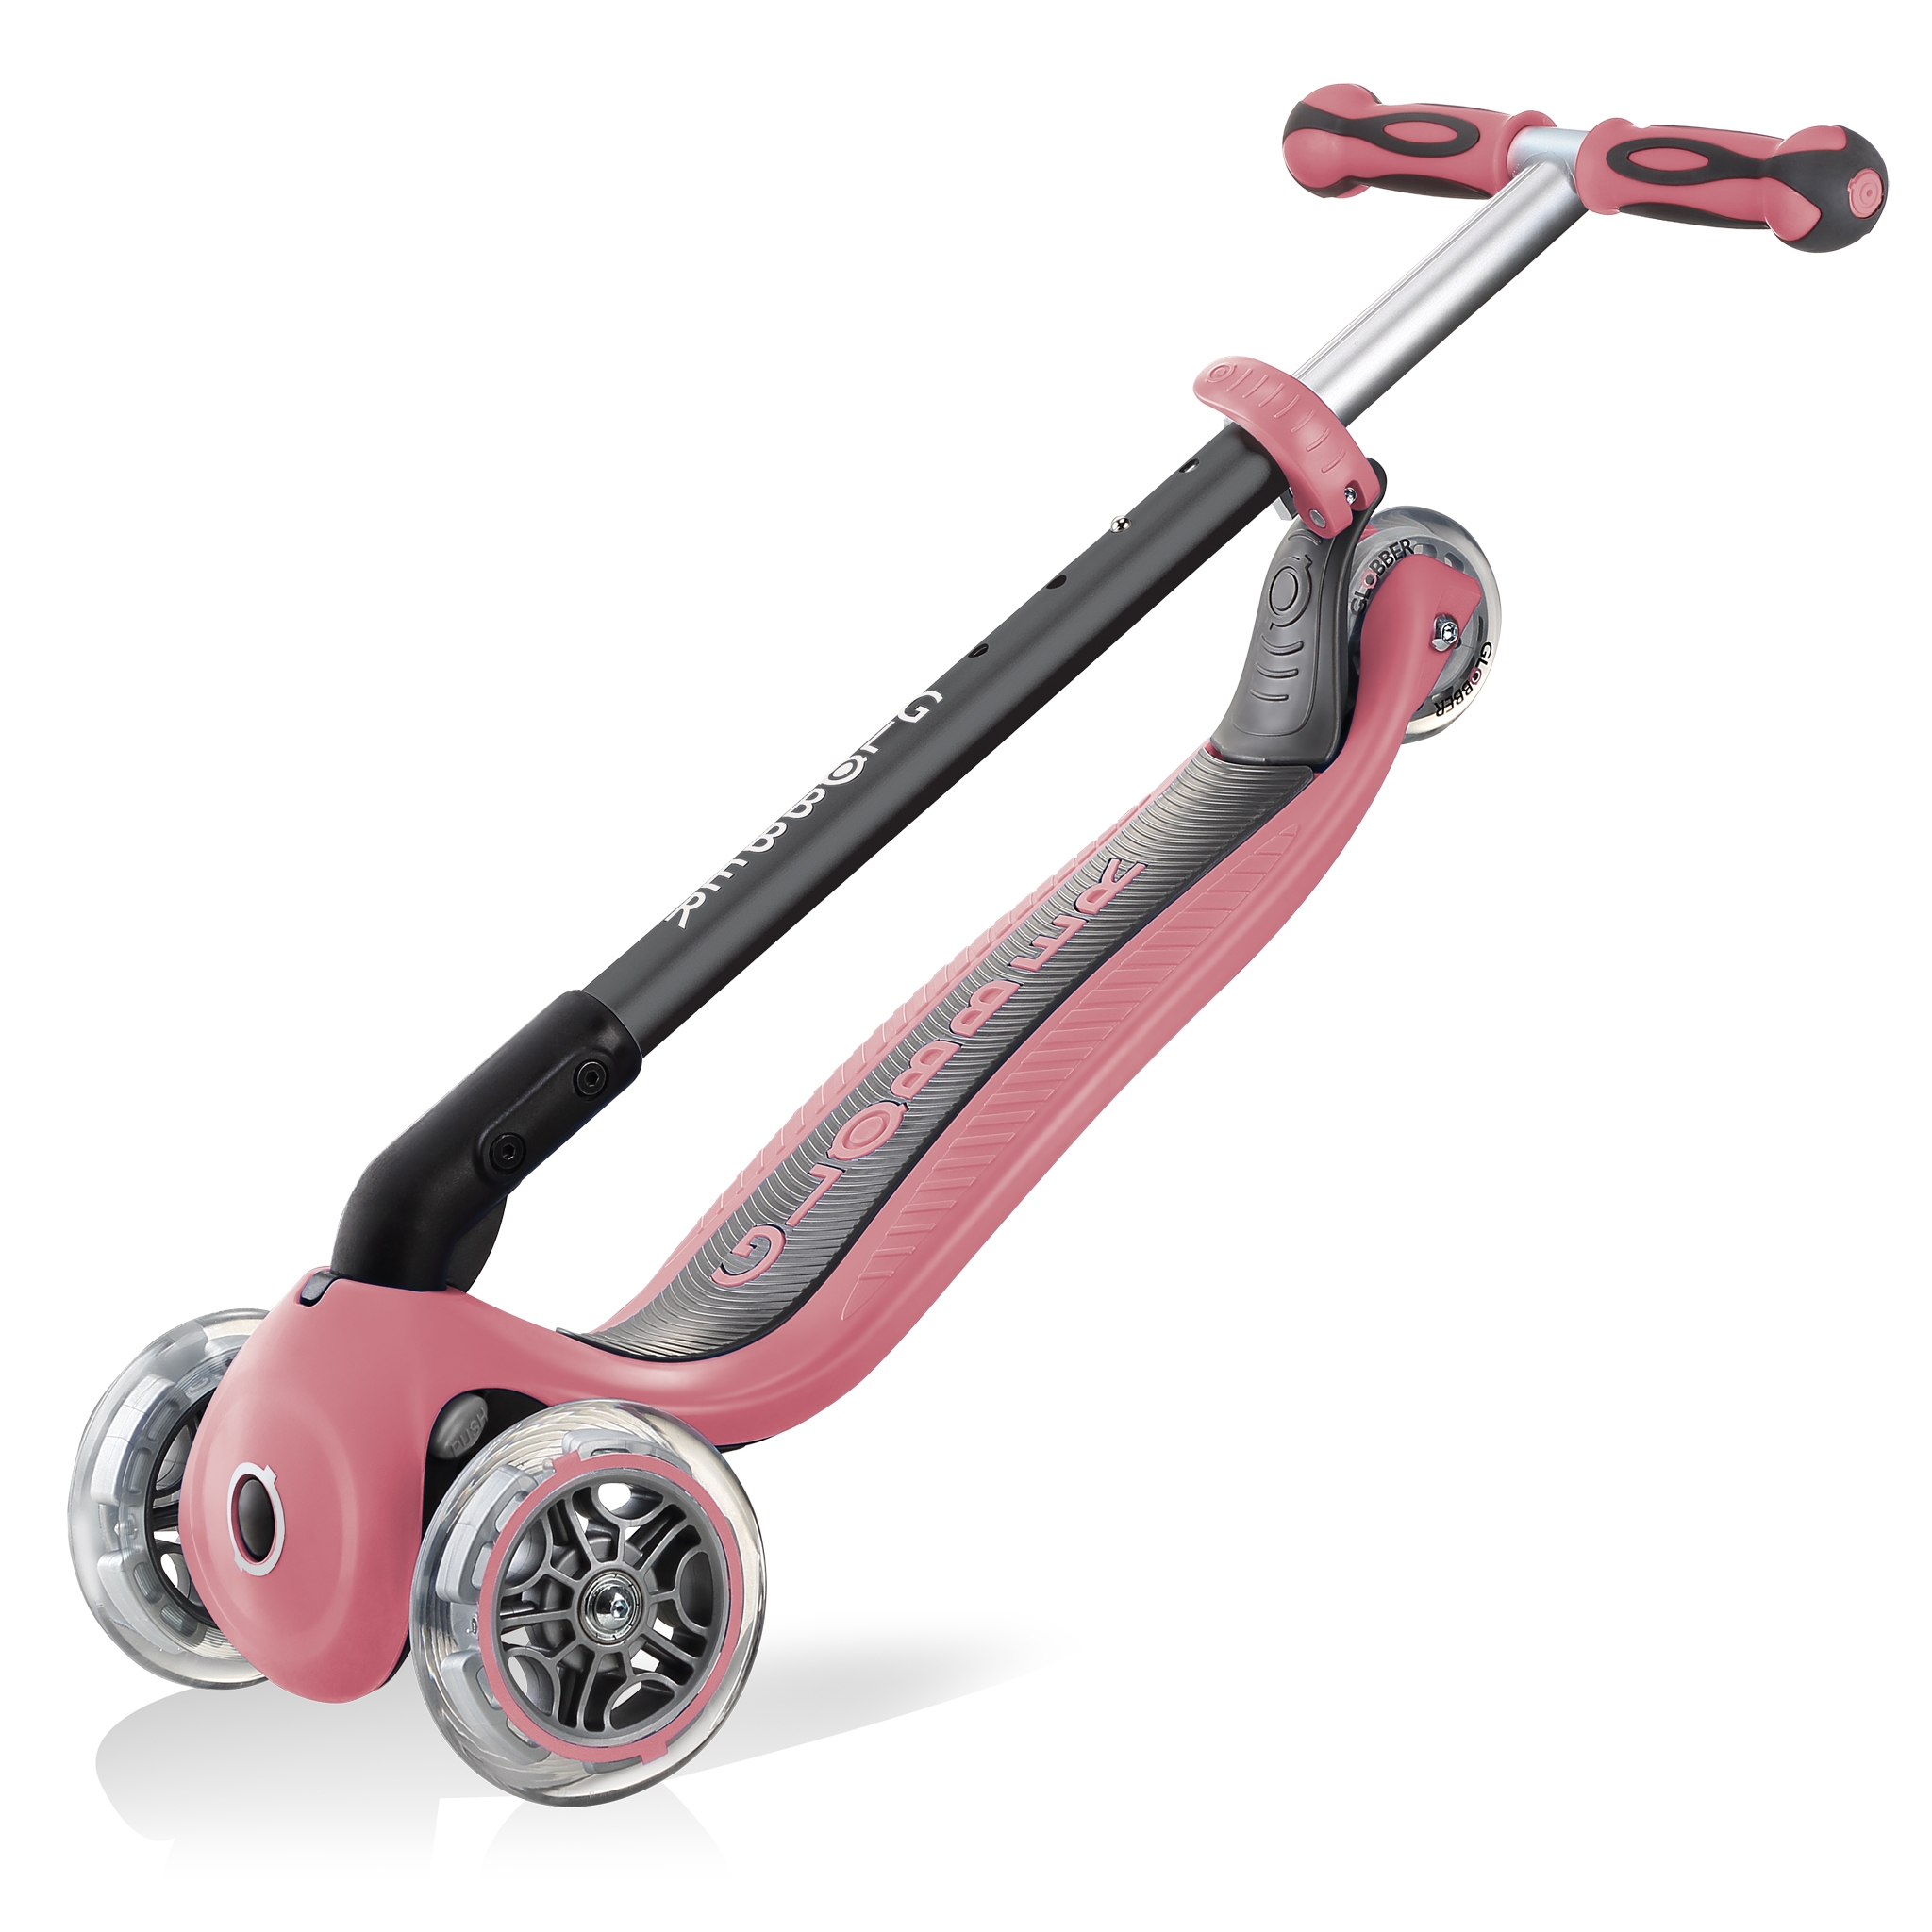 GO-UP-DELUXE-ride-on-walking-bike-scooter-trolley-mode-compatible-pastel-deep-pink 5